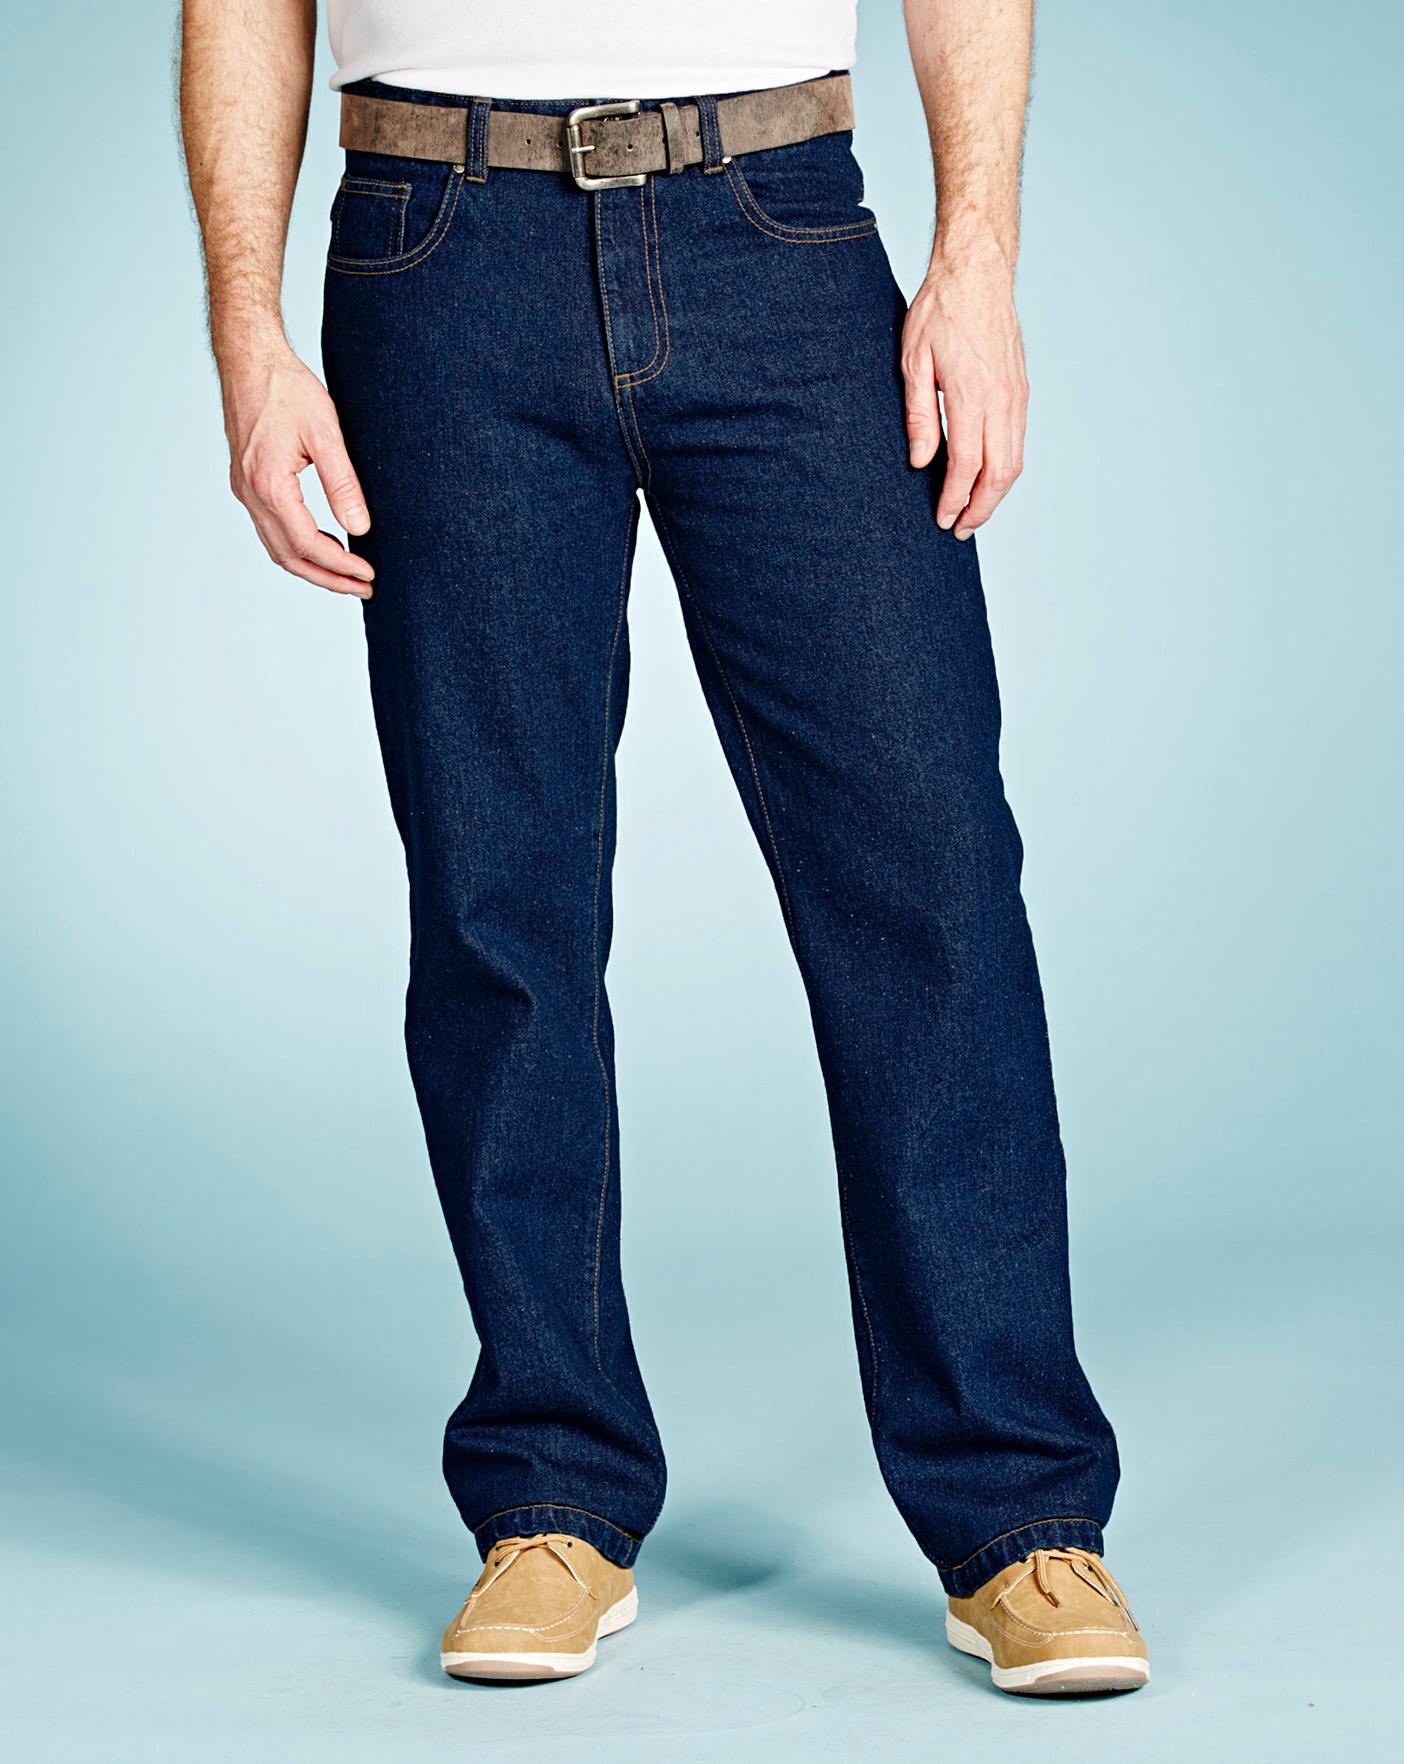 mens elastic waist jeans with drawstring